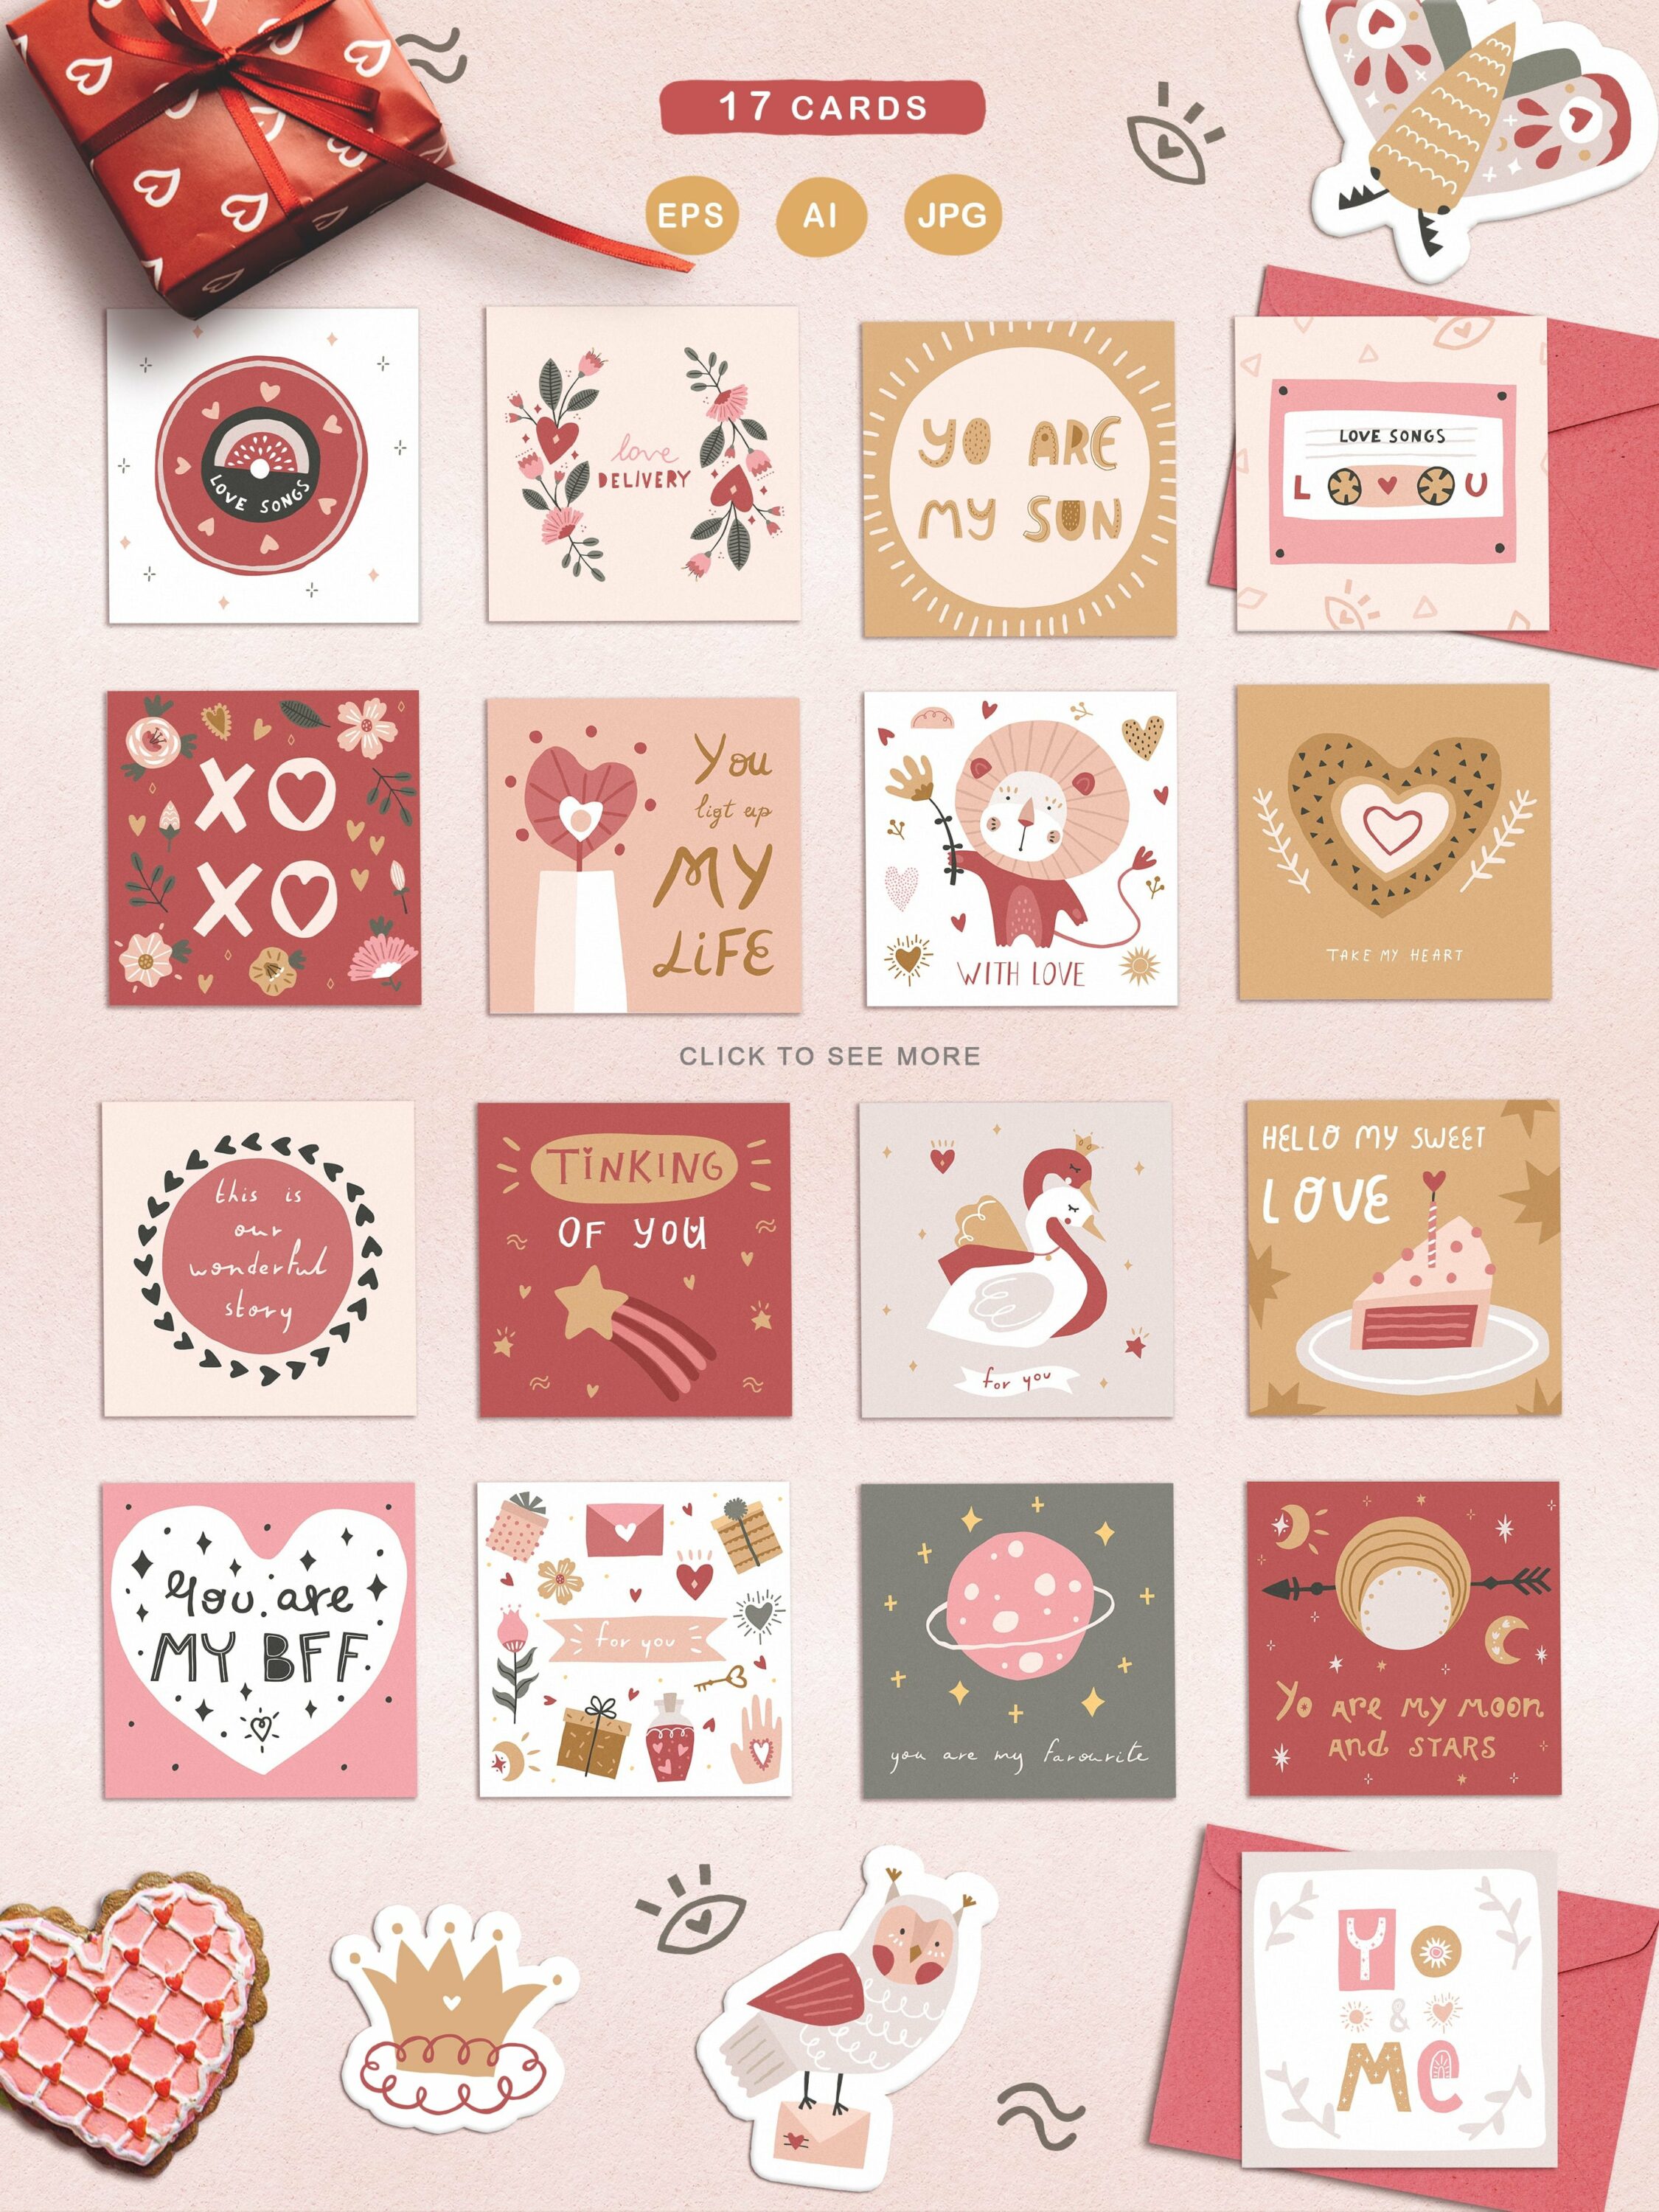 Valentines cards for your projects.